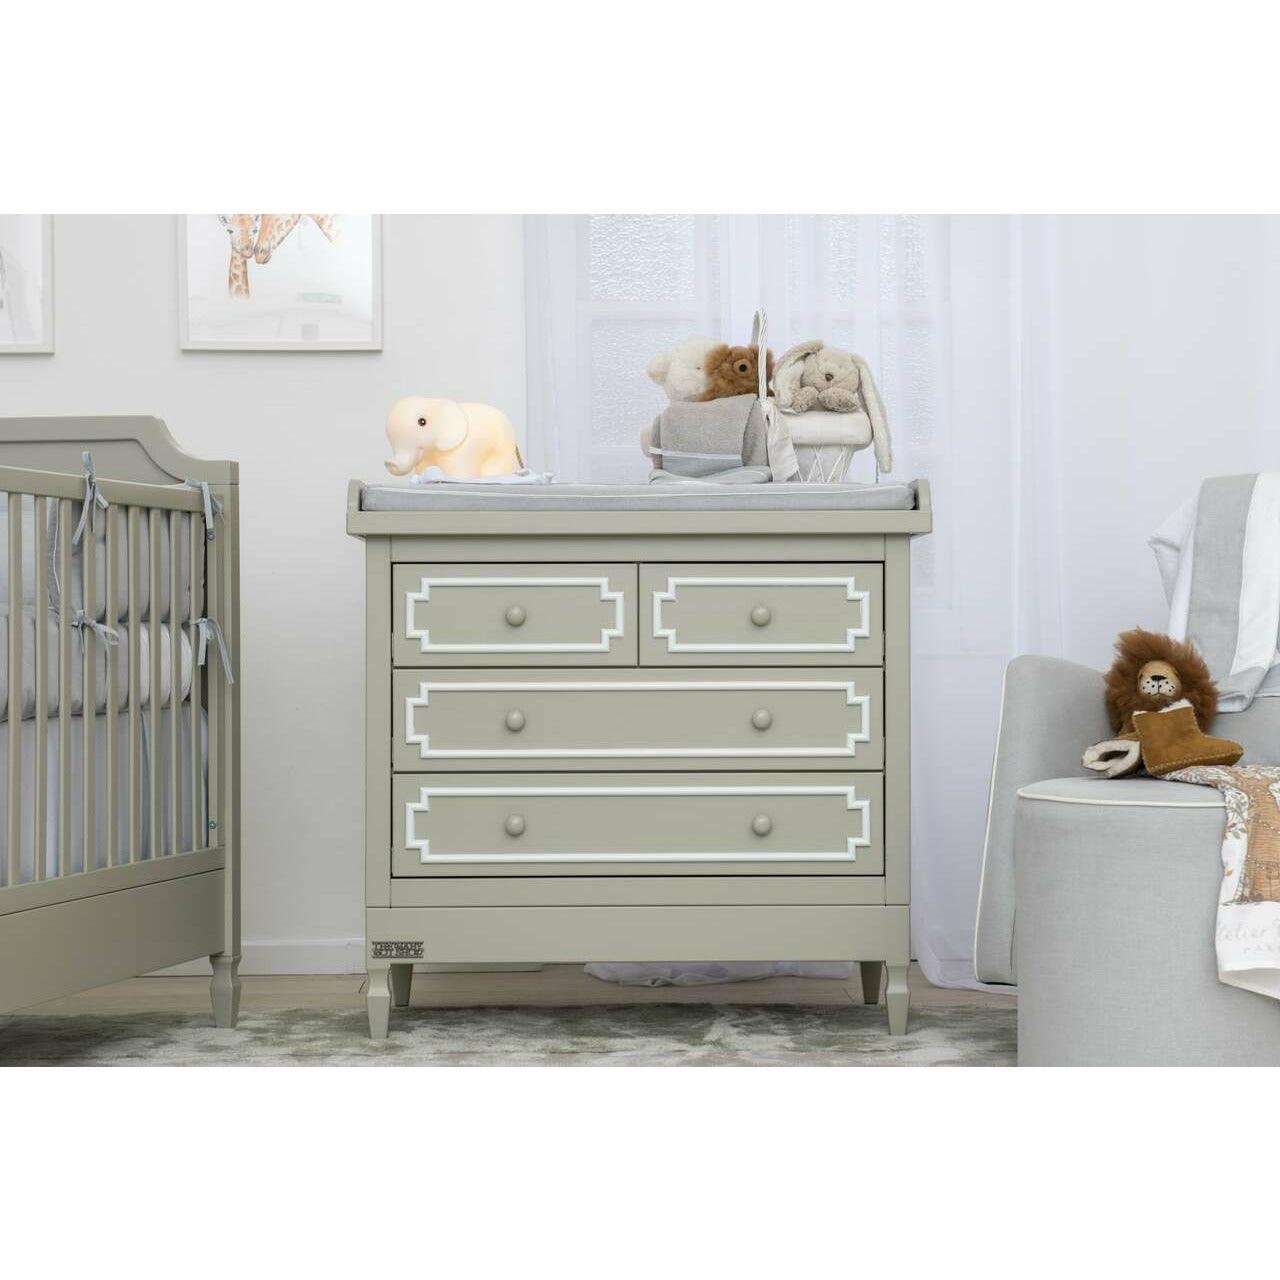 Regency Changing Unit - The Baby Cot Shop, Chelsea